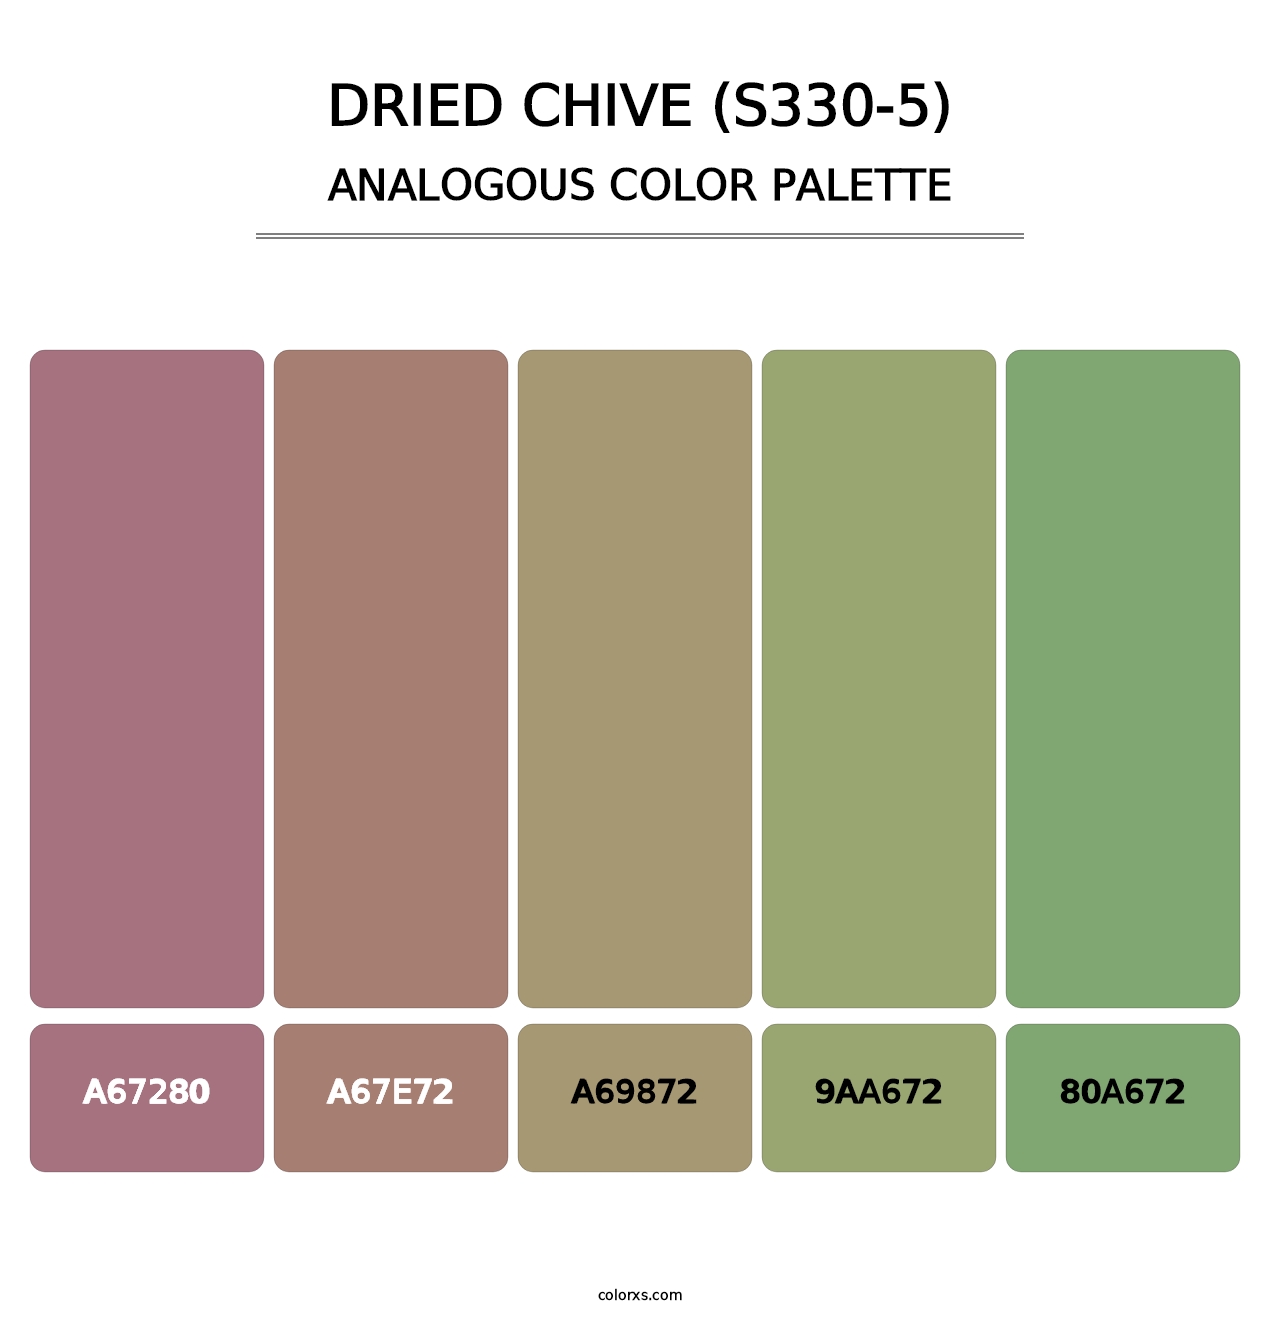 Dried Chive (S330-5) - Analogous Color Palette